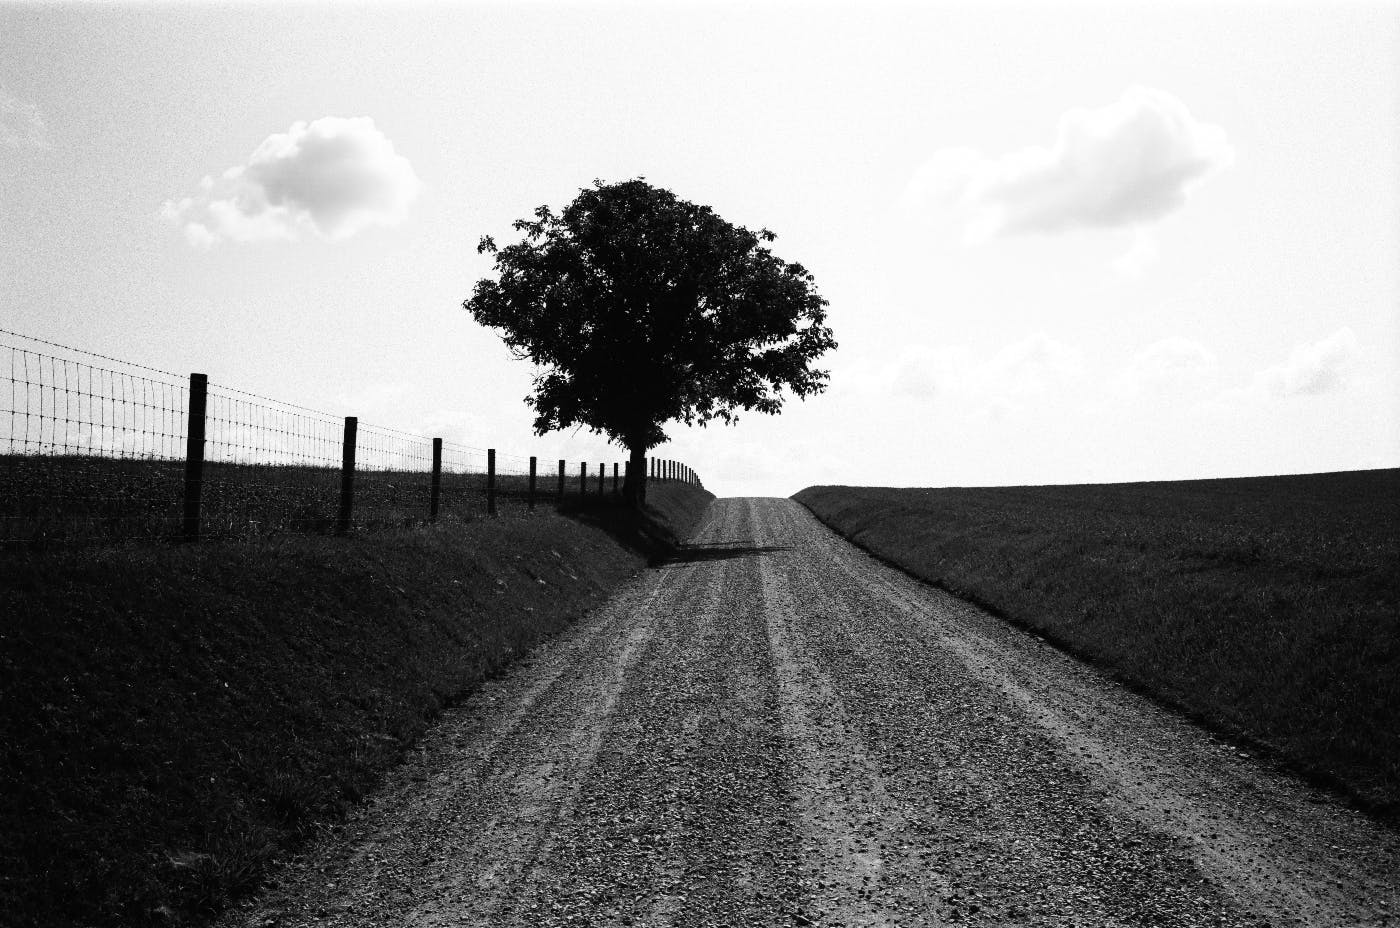 A grey scale image of an empty country road, a single tree and a wore fence on the left